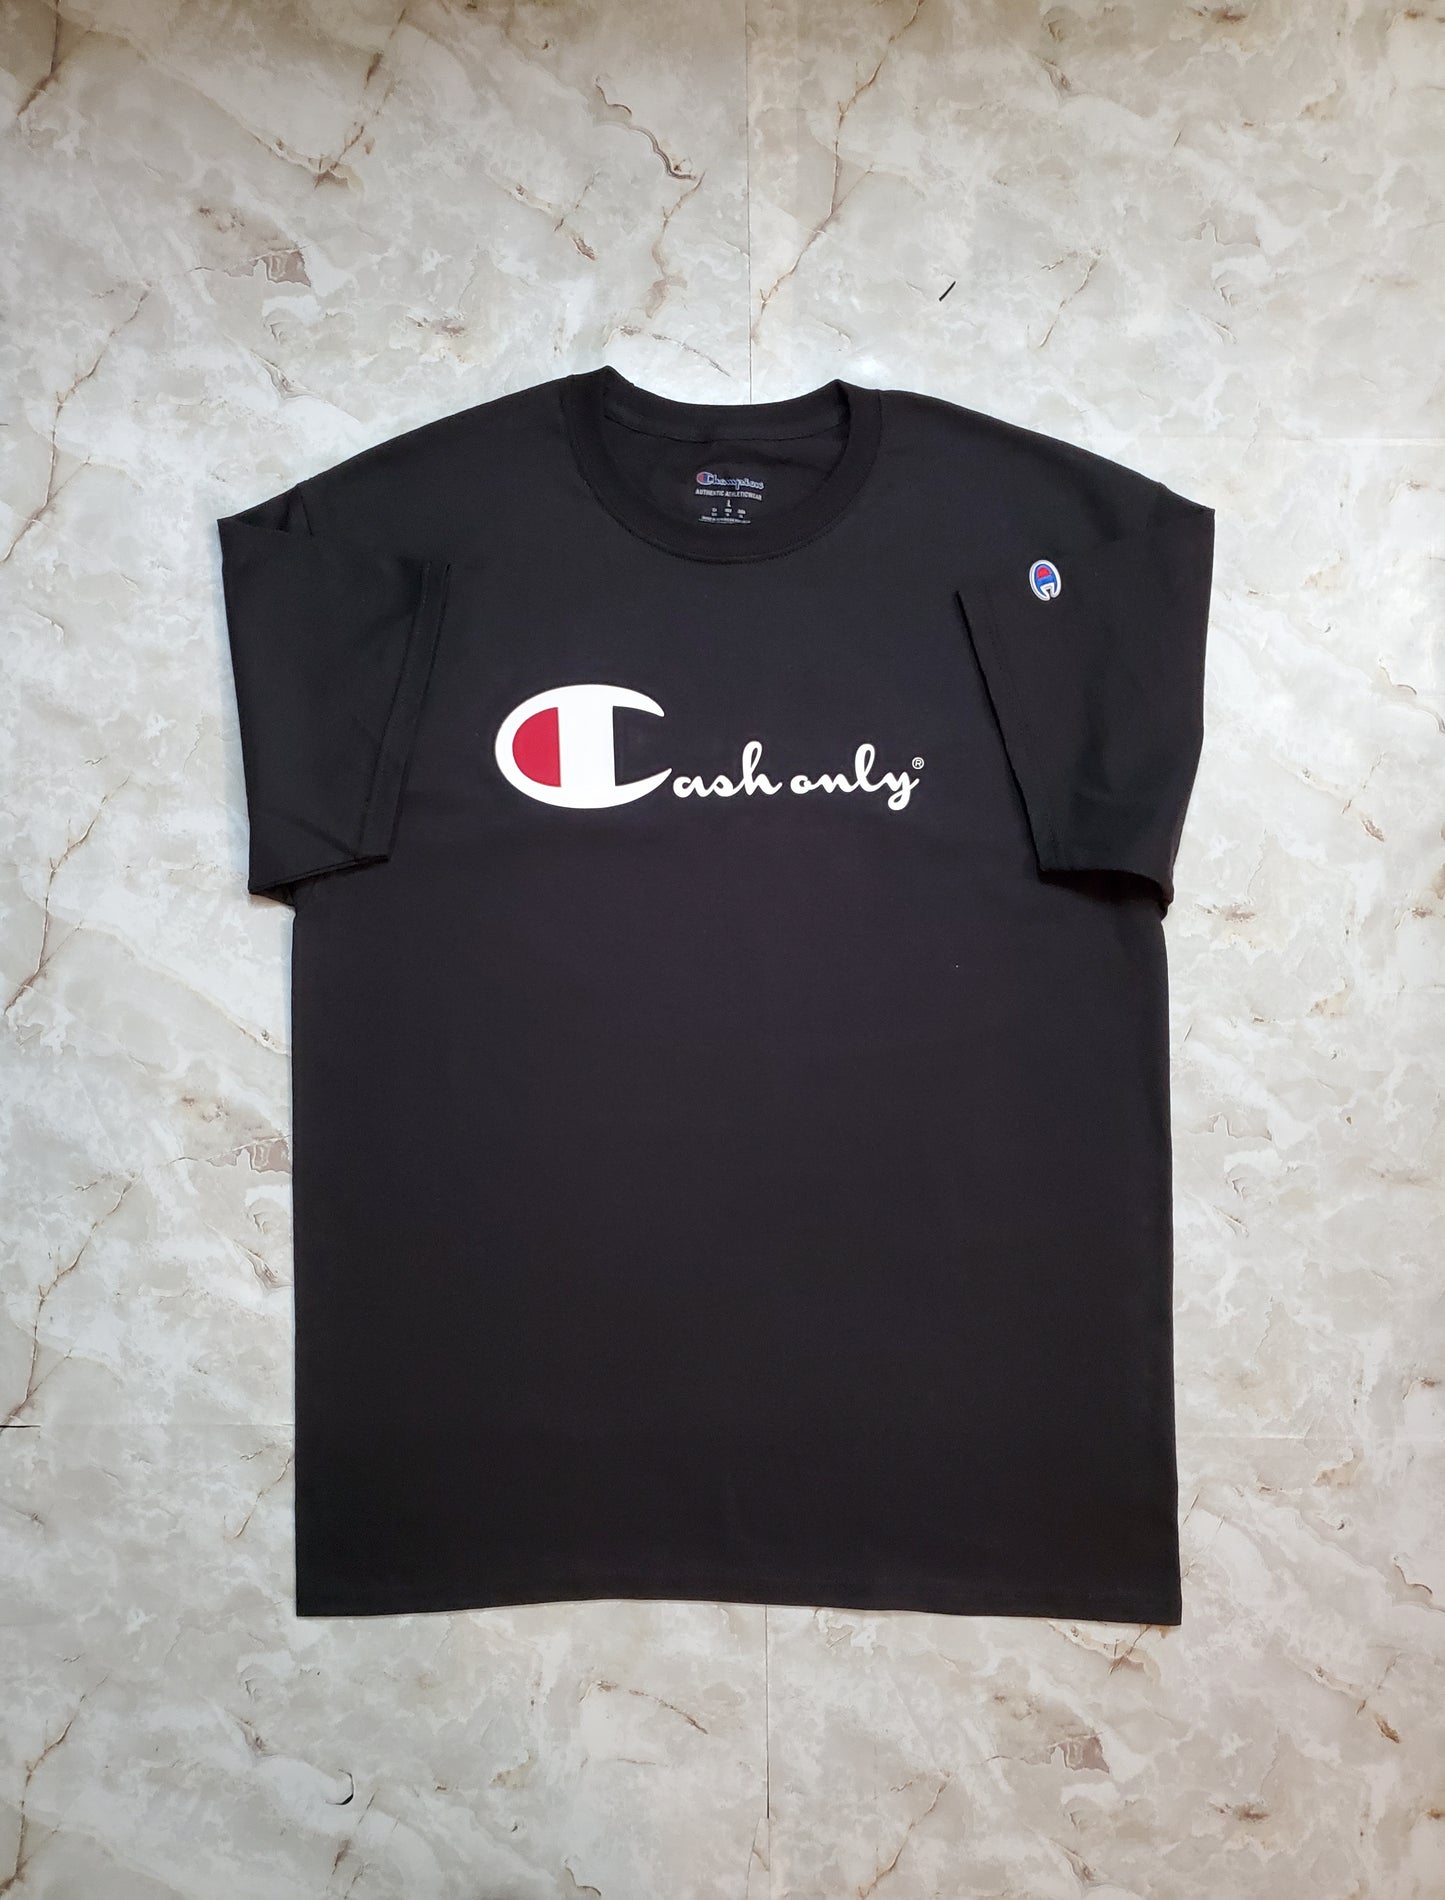 Cash Only T-Shirt - Centre Ave Clothing Co.